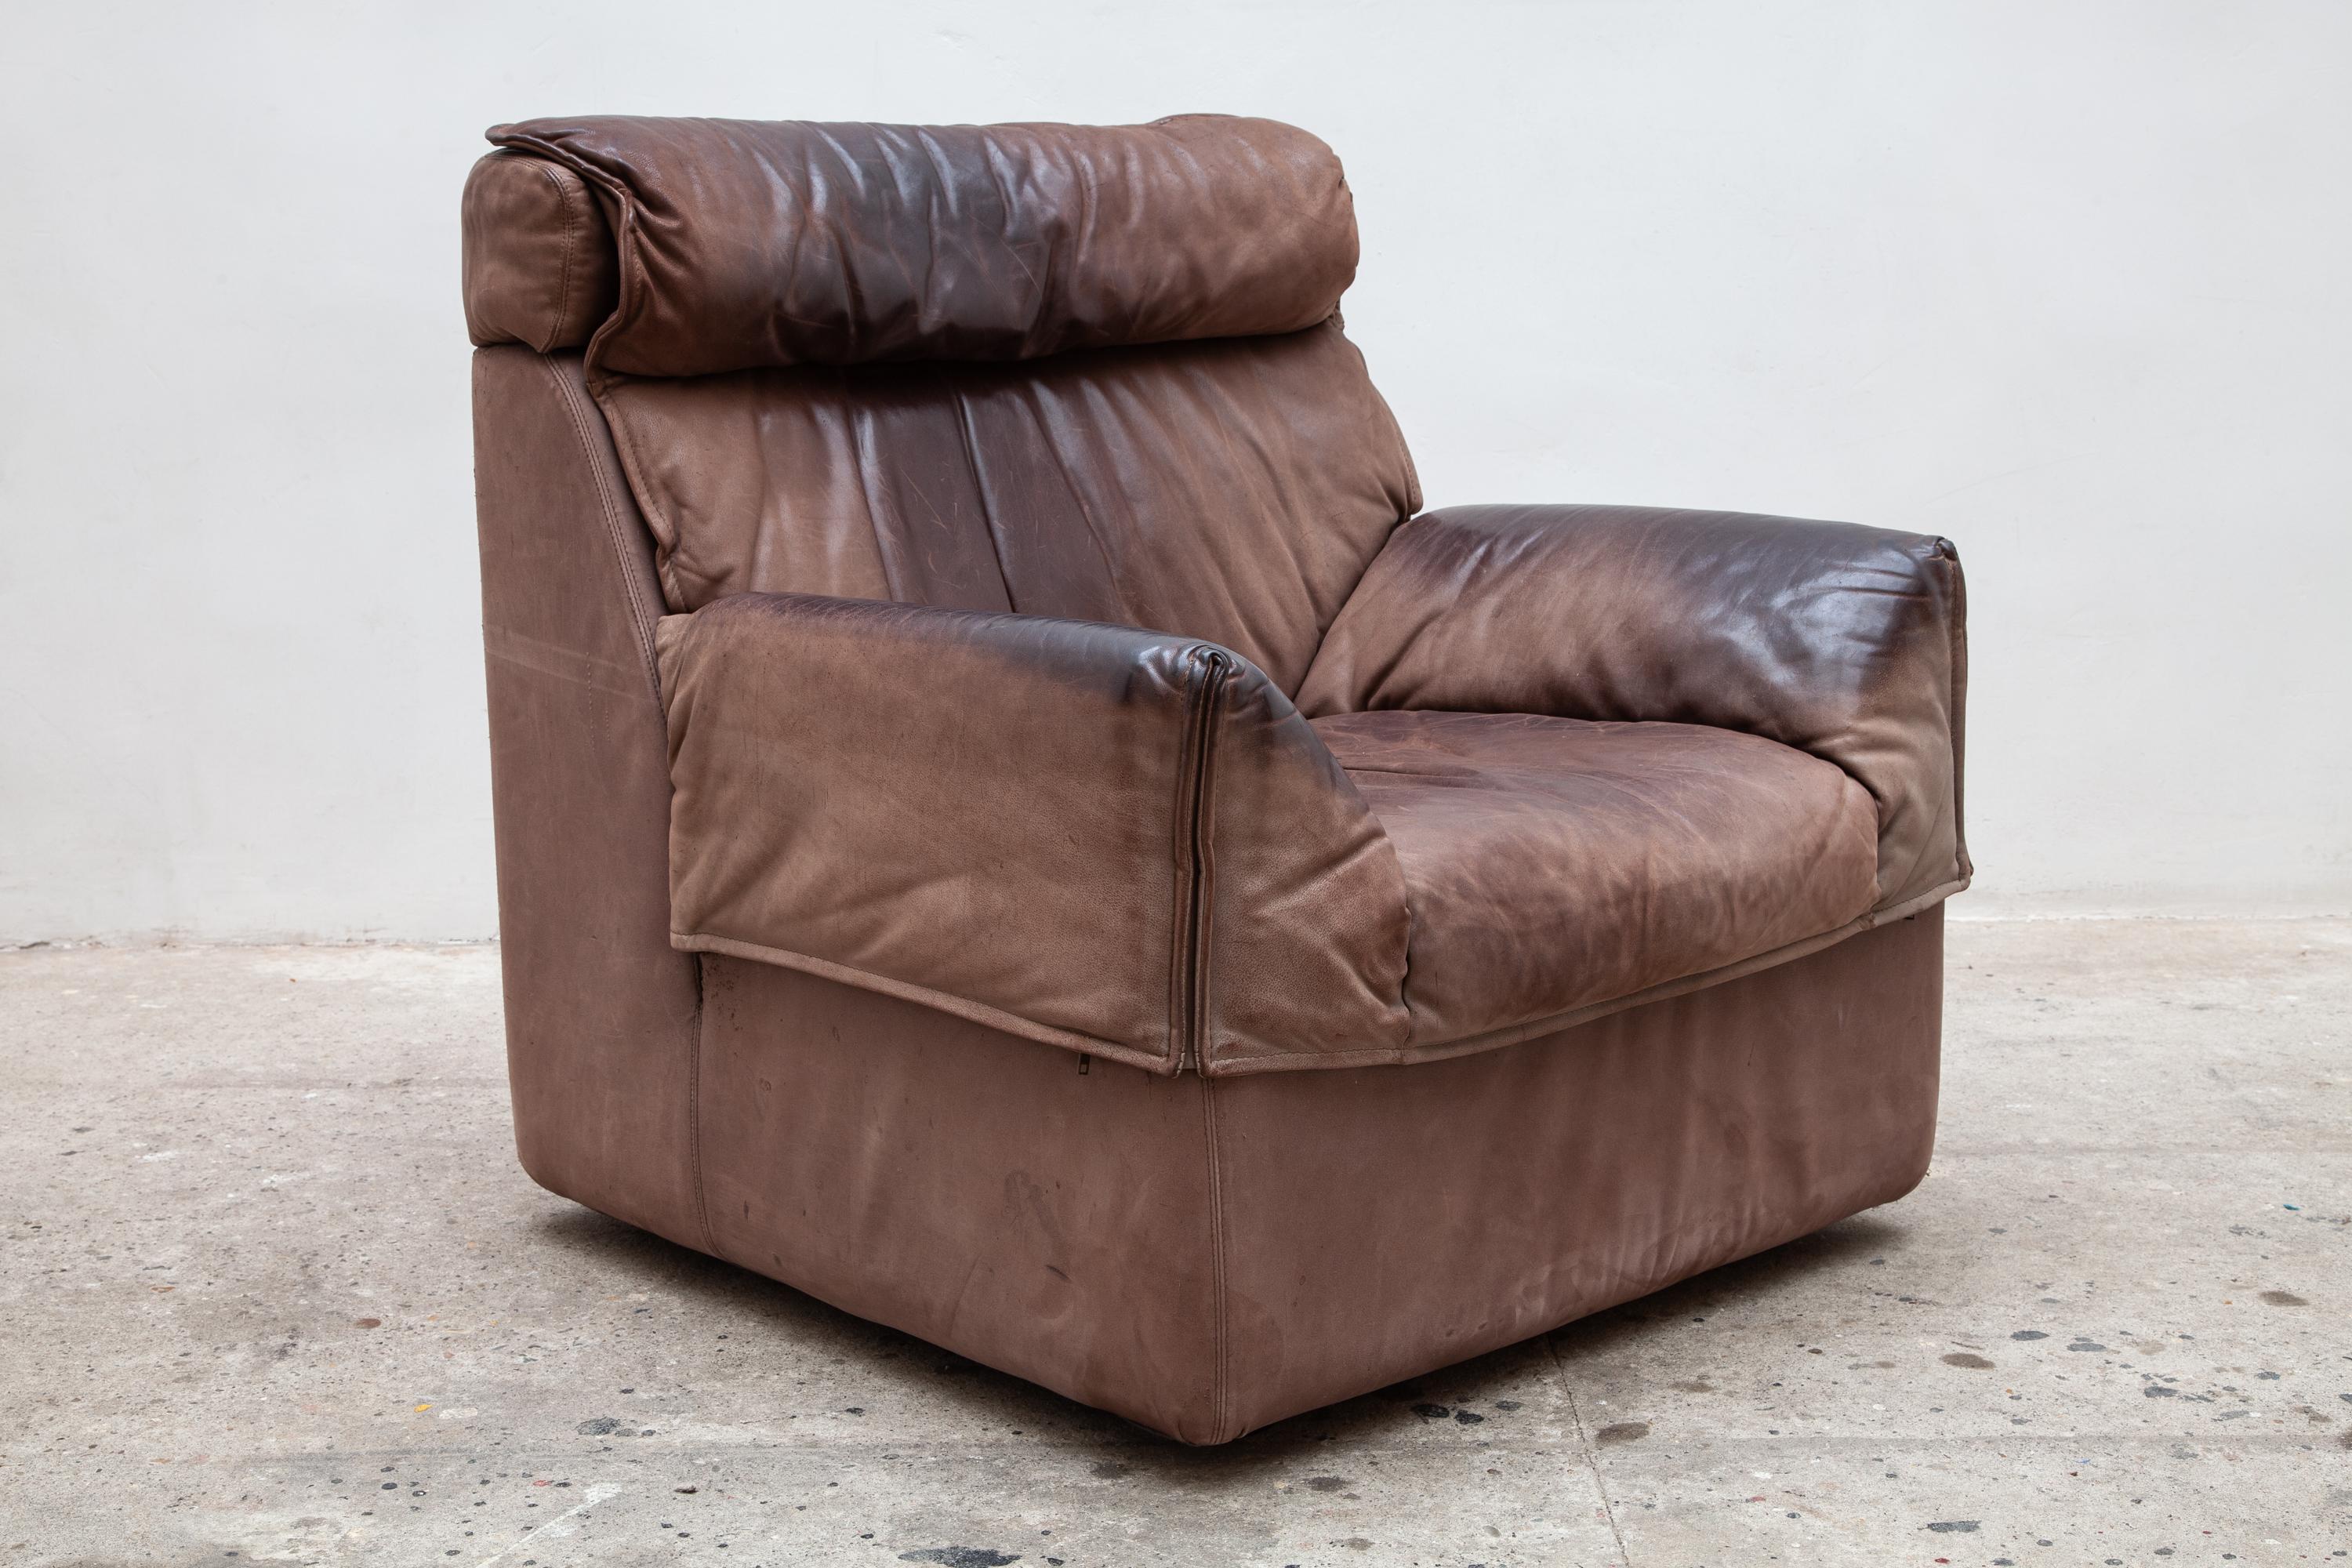 Vintage brown buffalo leather lounge and side chair by COR, Germany.
Smooth brown leather with aged patina. Can be grouped with our COR modular sofa, couch in a separate listing. Ref: LU931813512812.
Very nice patina and comfortable seat.